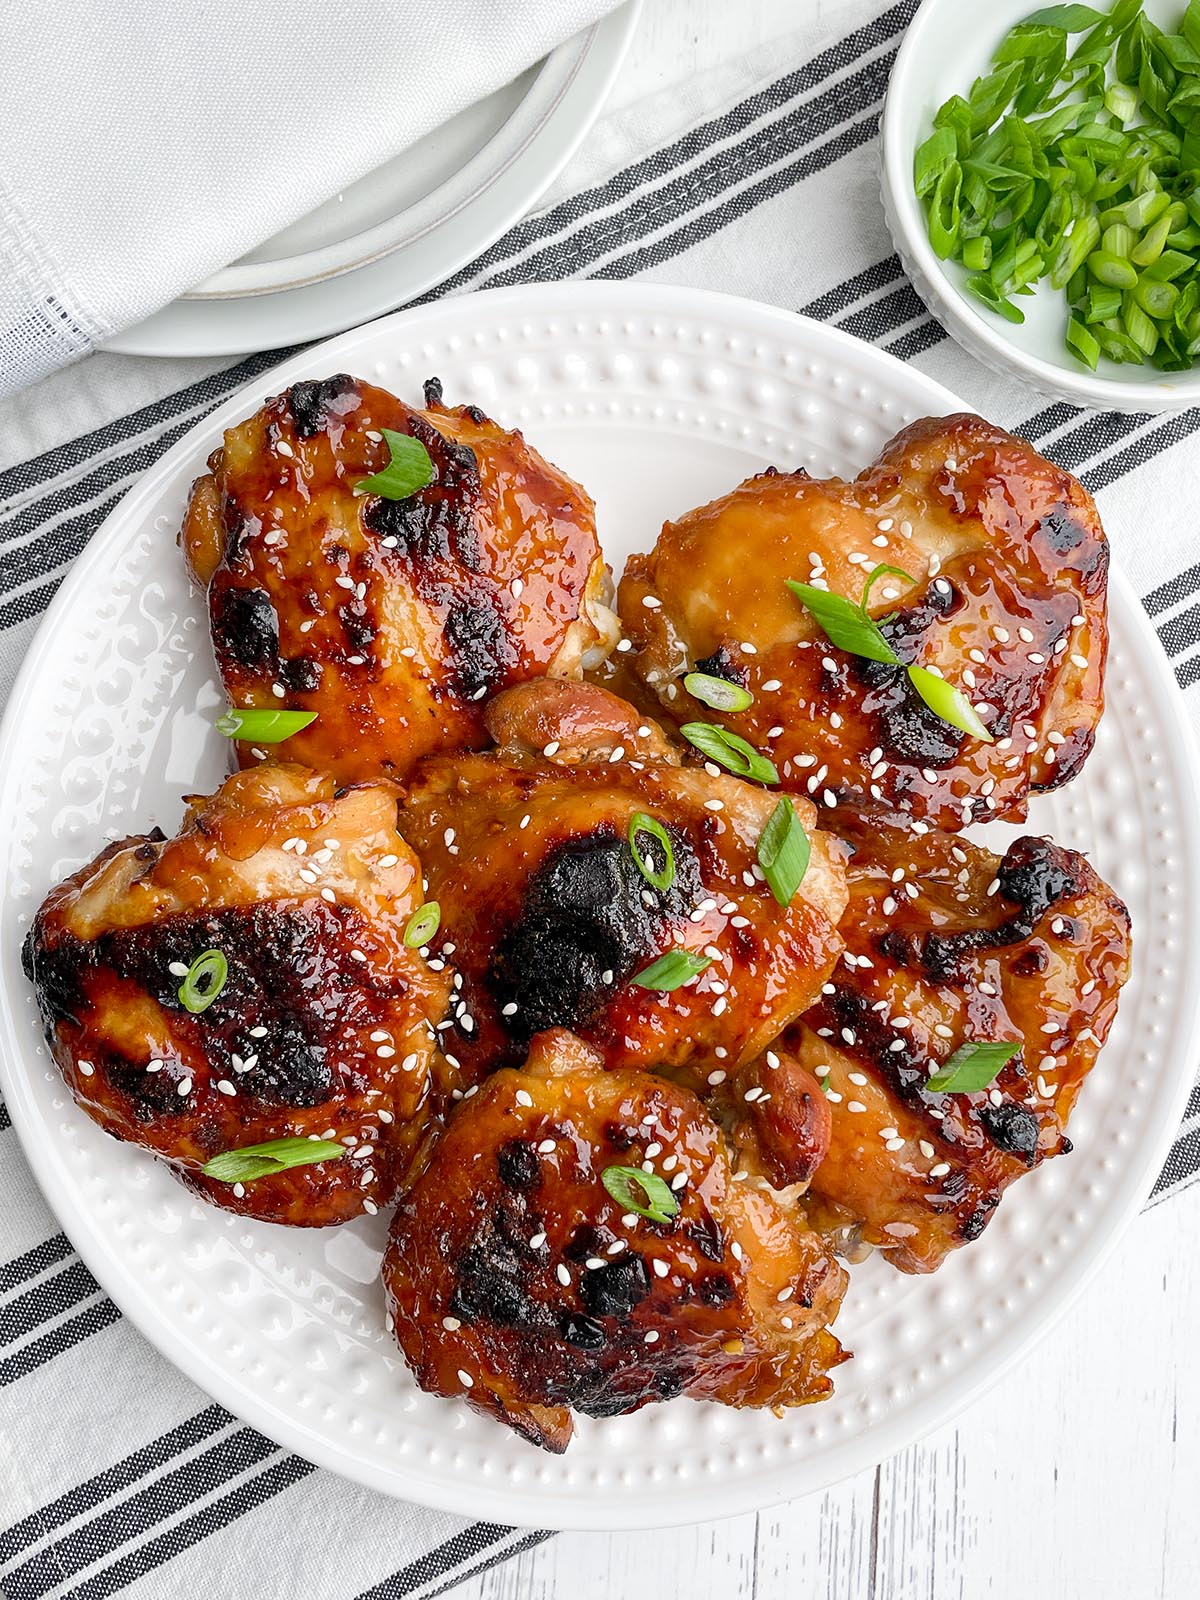 oven baked teriyaki chicken thighs on a white plate